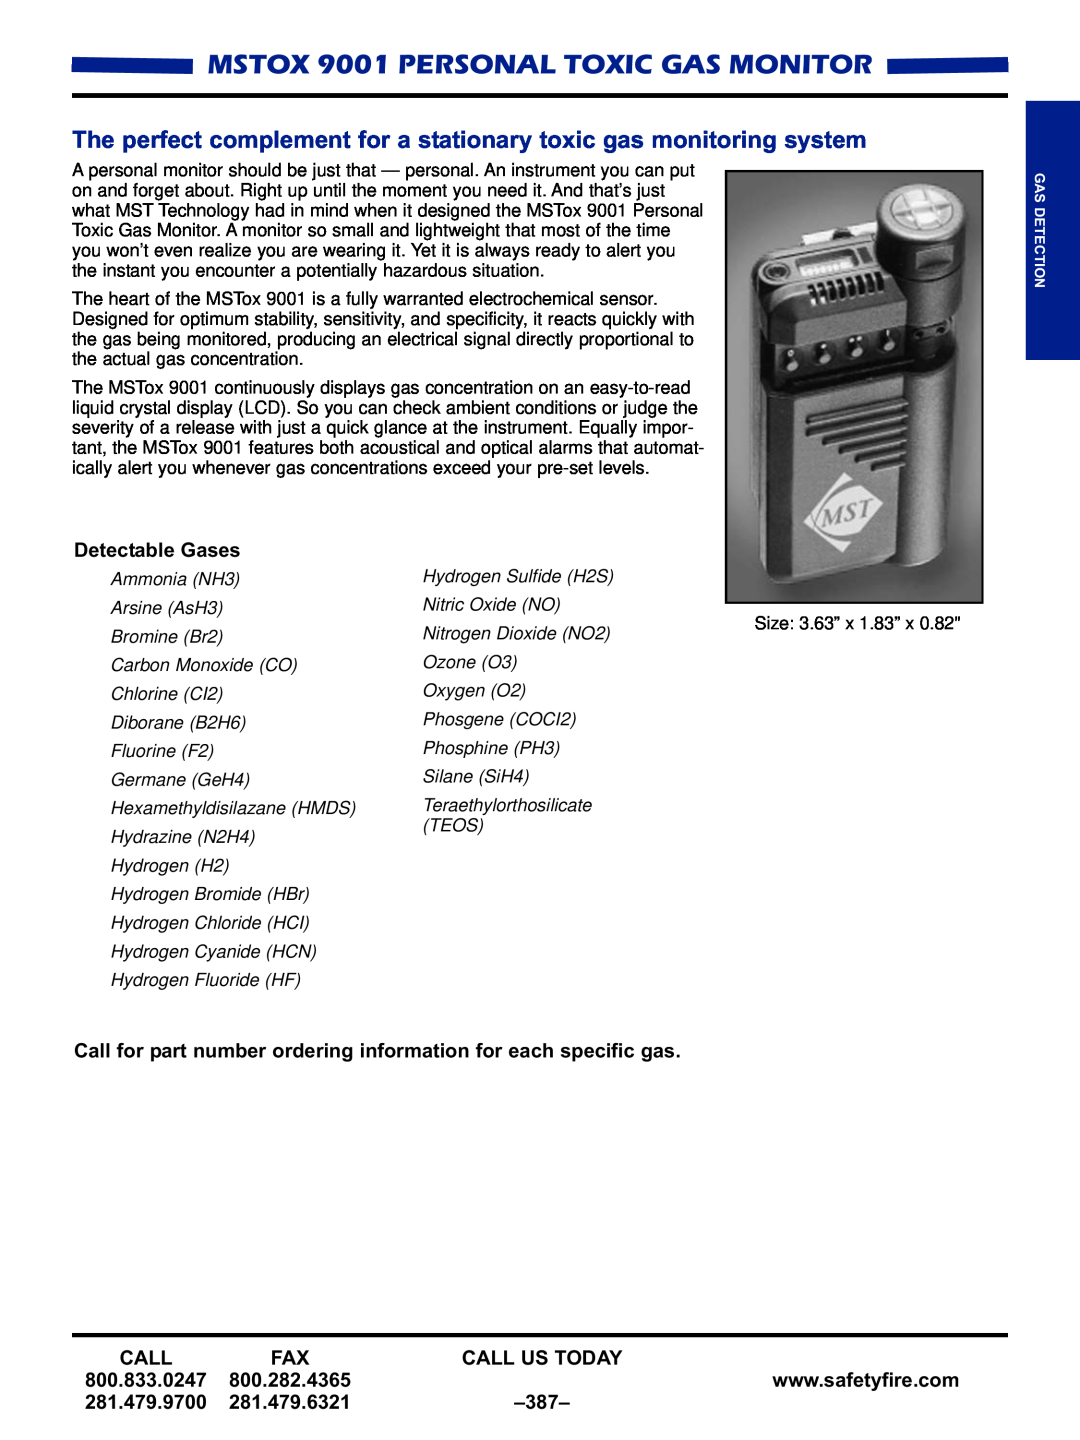 Black & Decker MULTI-GAS DETECTORS manual MSTOX 9001 PERSONAL TOXIC GAS MONITOR, Detectable Gases, Call Us Today, 387 